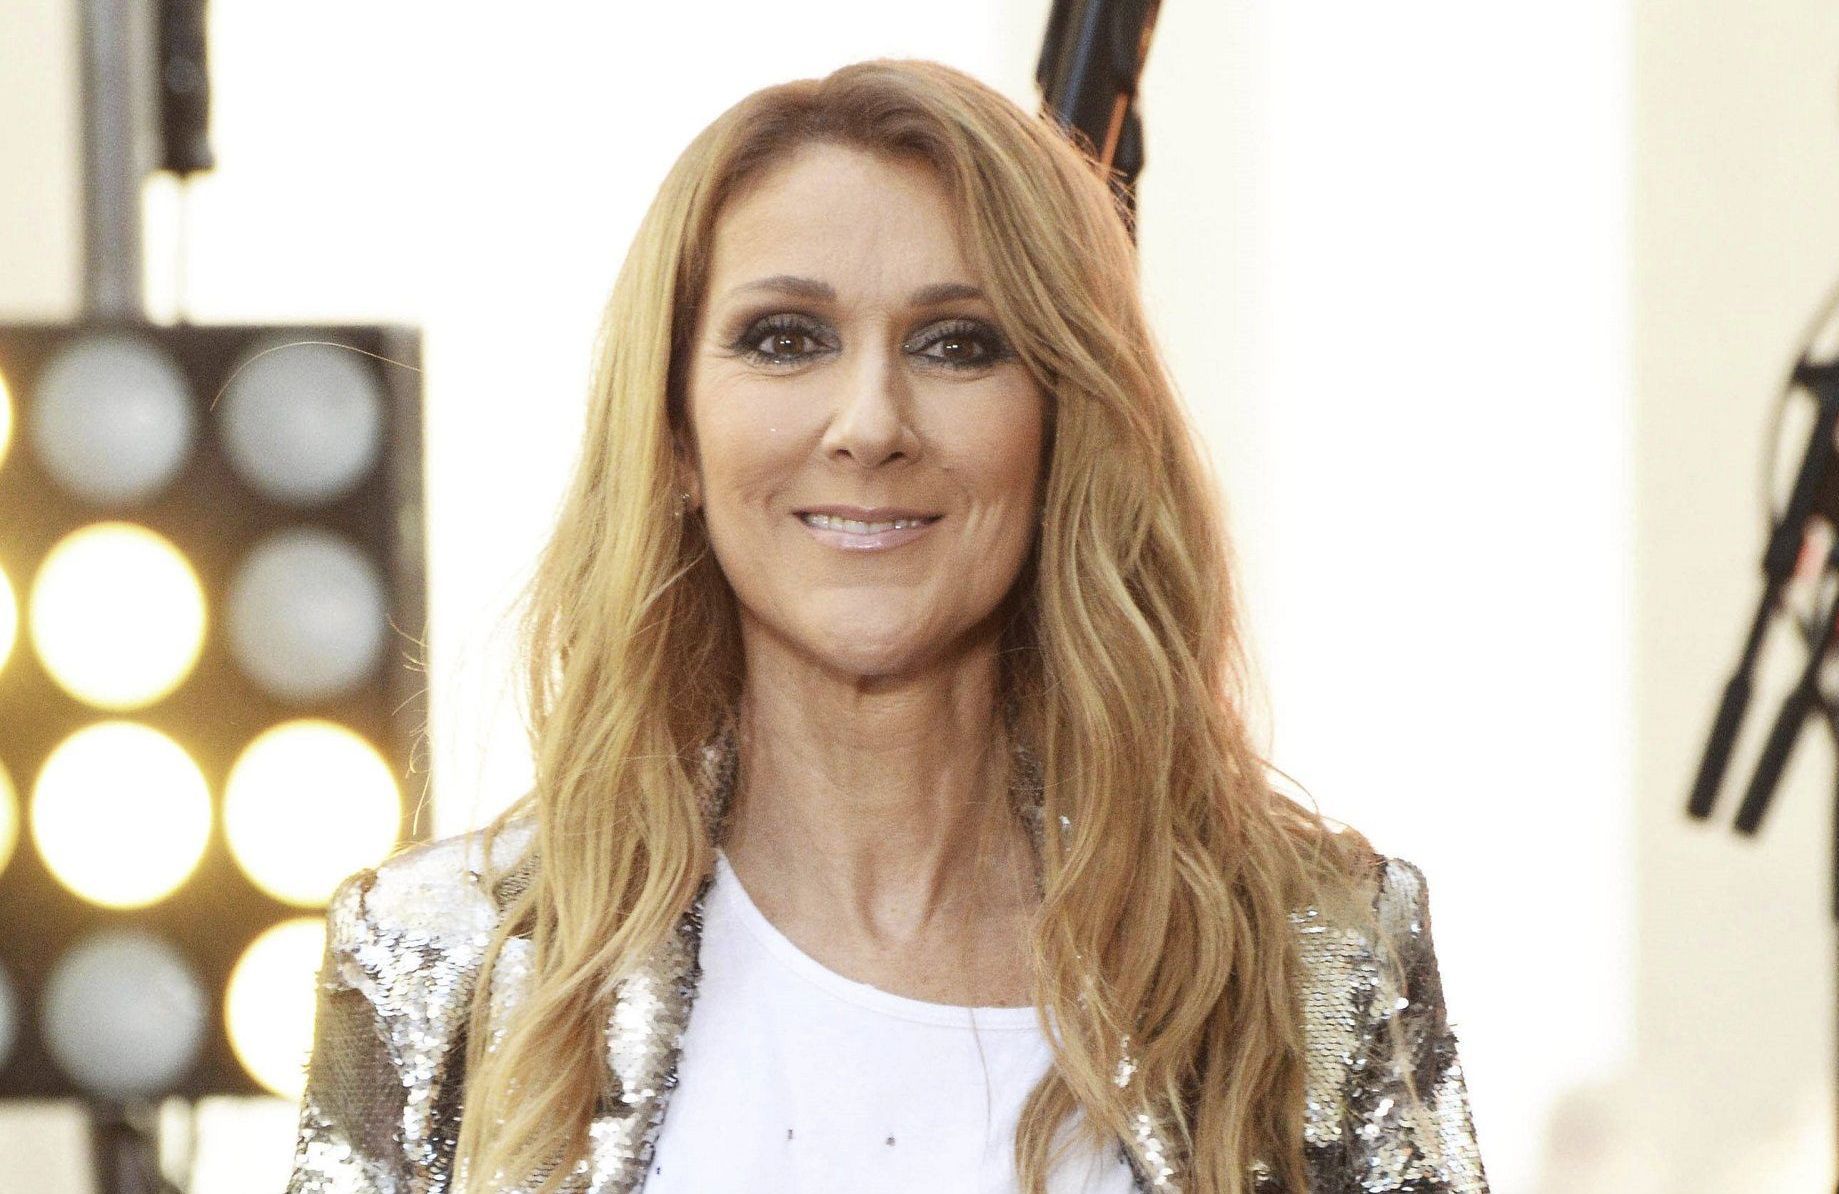 Celine Dion offers an unreleased clip of "My Heart Will Go On" - Elle